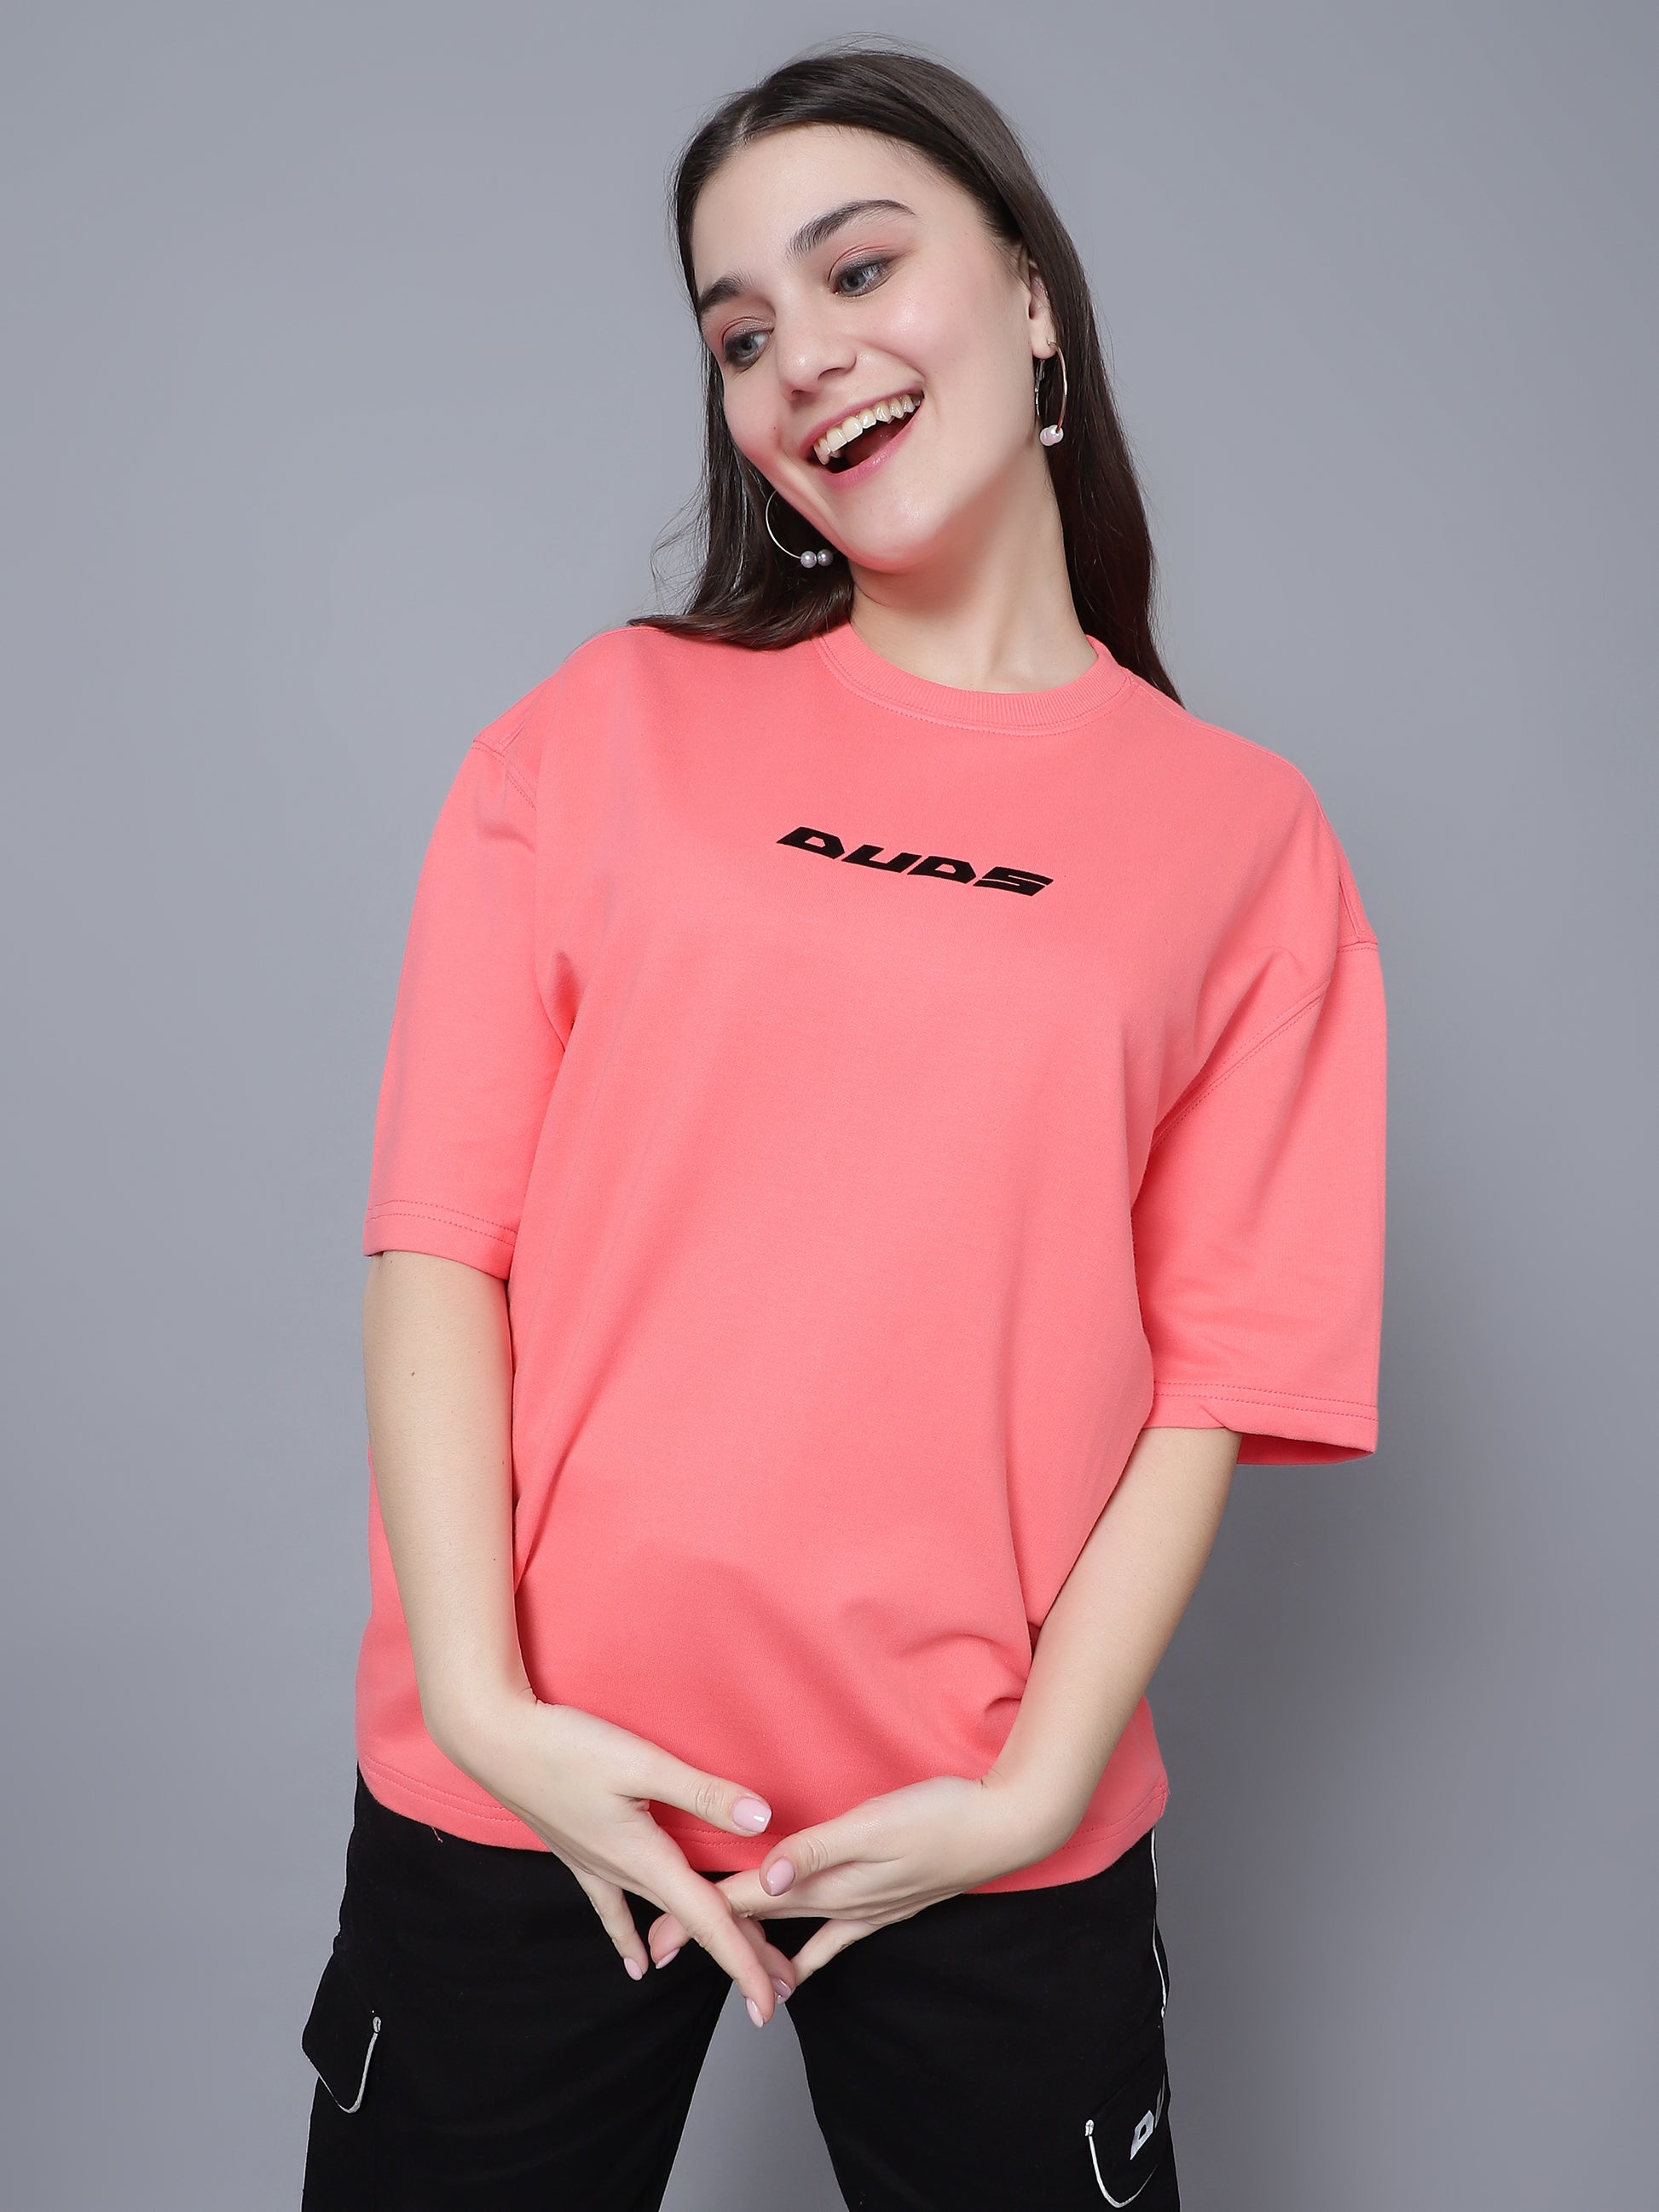 Guess Who Over-Sized T-Shirt (Salmon Pink) - Wearduds